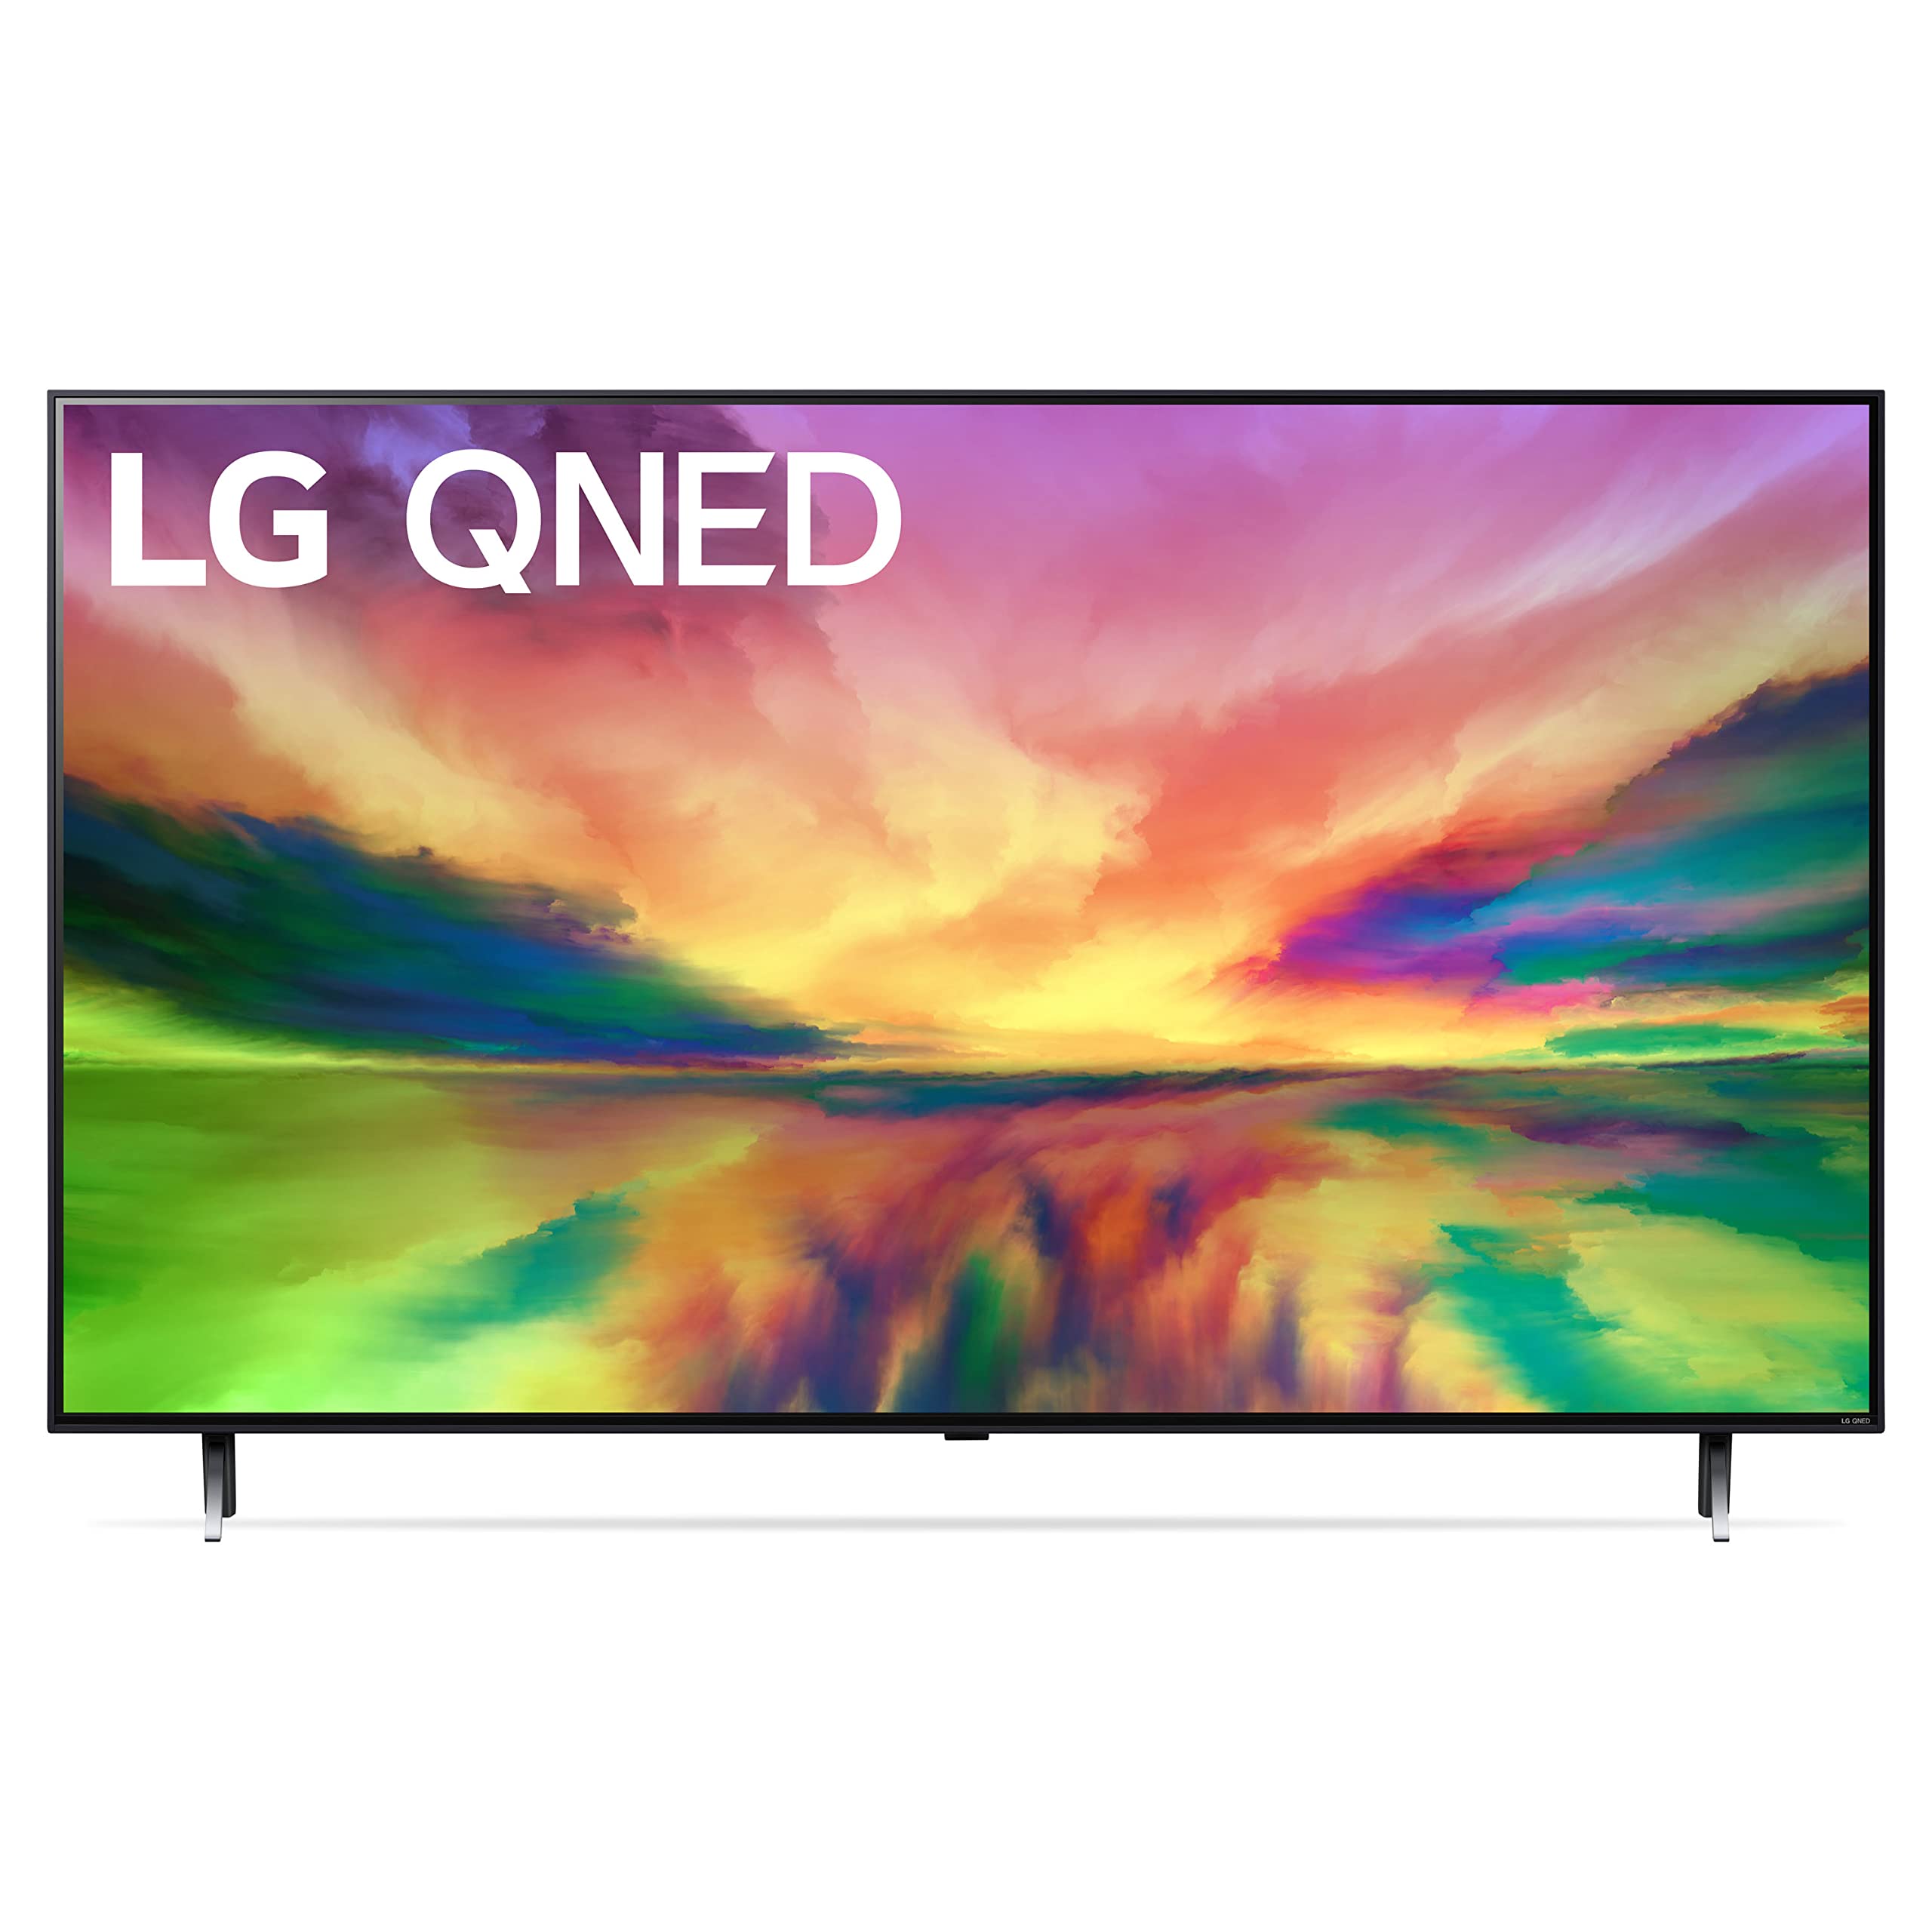 LG QNED80 Series 50-Inch Class QNED Mini LED Smart TV 4K Processor Smart Flat Screen TV for Gaming with Magic Remote AI-Powered 50QNED80URA, 2023 with Alexa Built-in